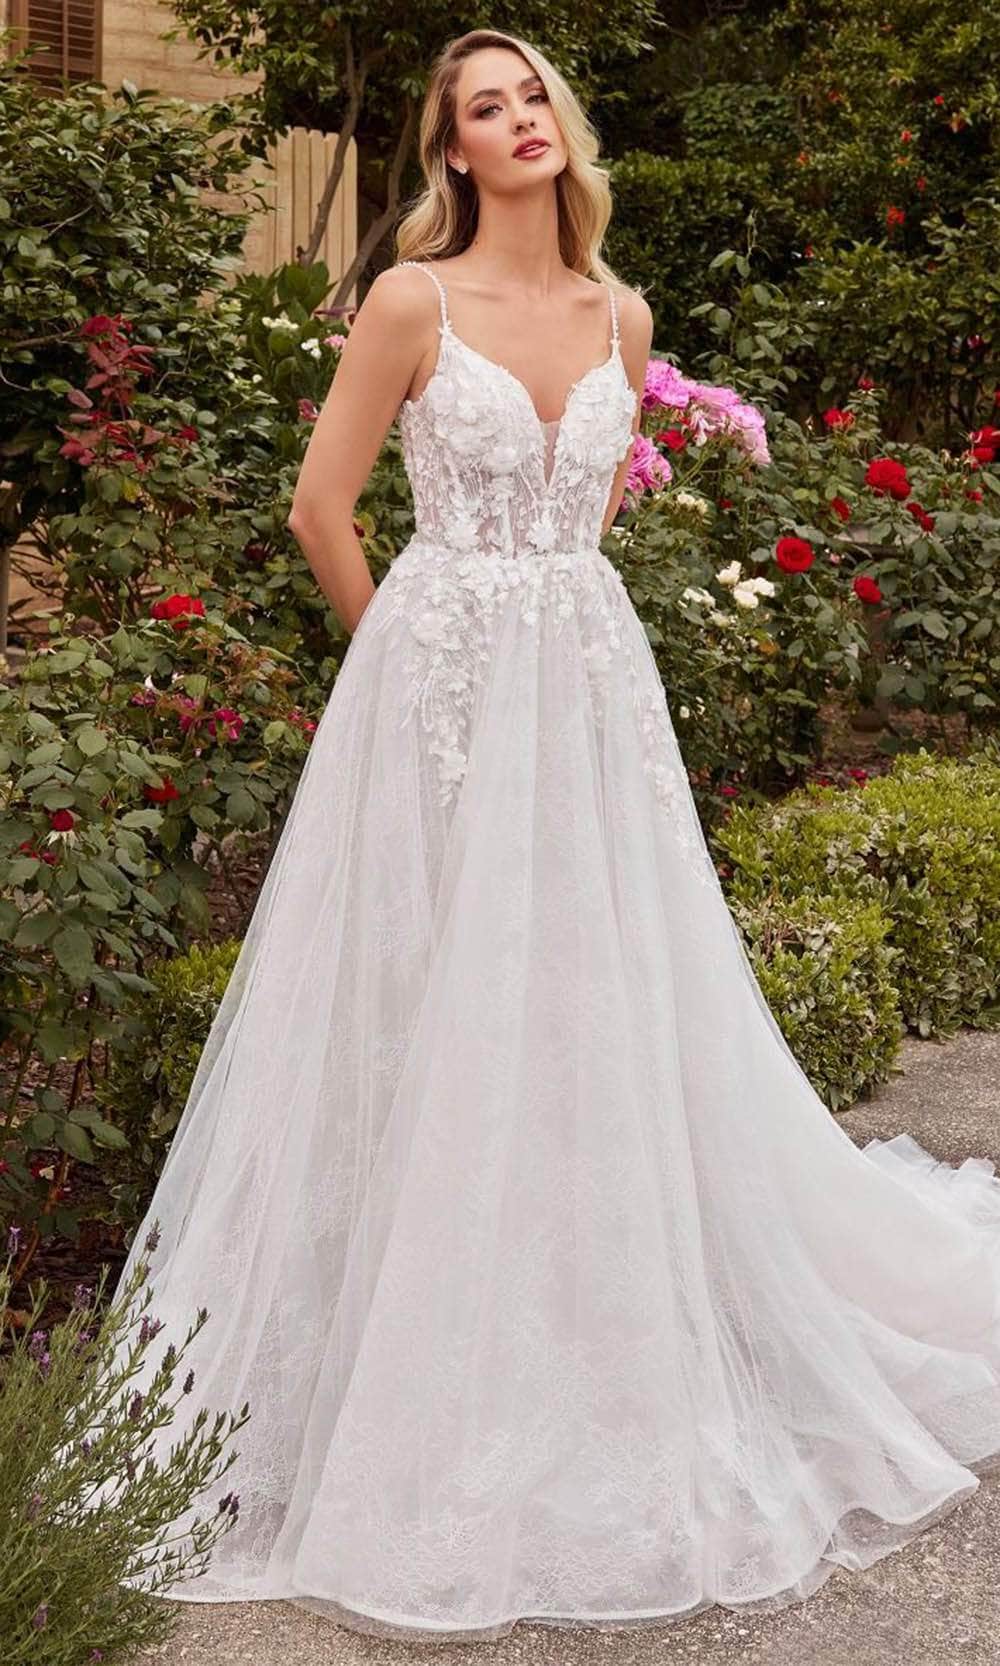 Ladivine CD857W - A-line Bridal Gown 2 / Off White